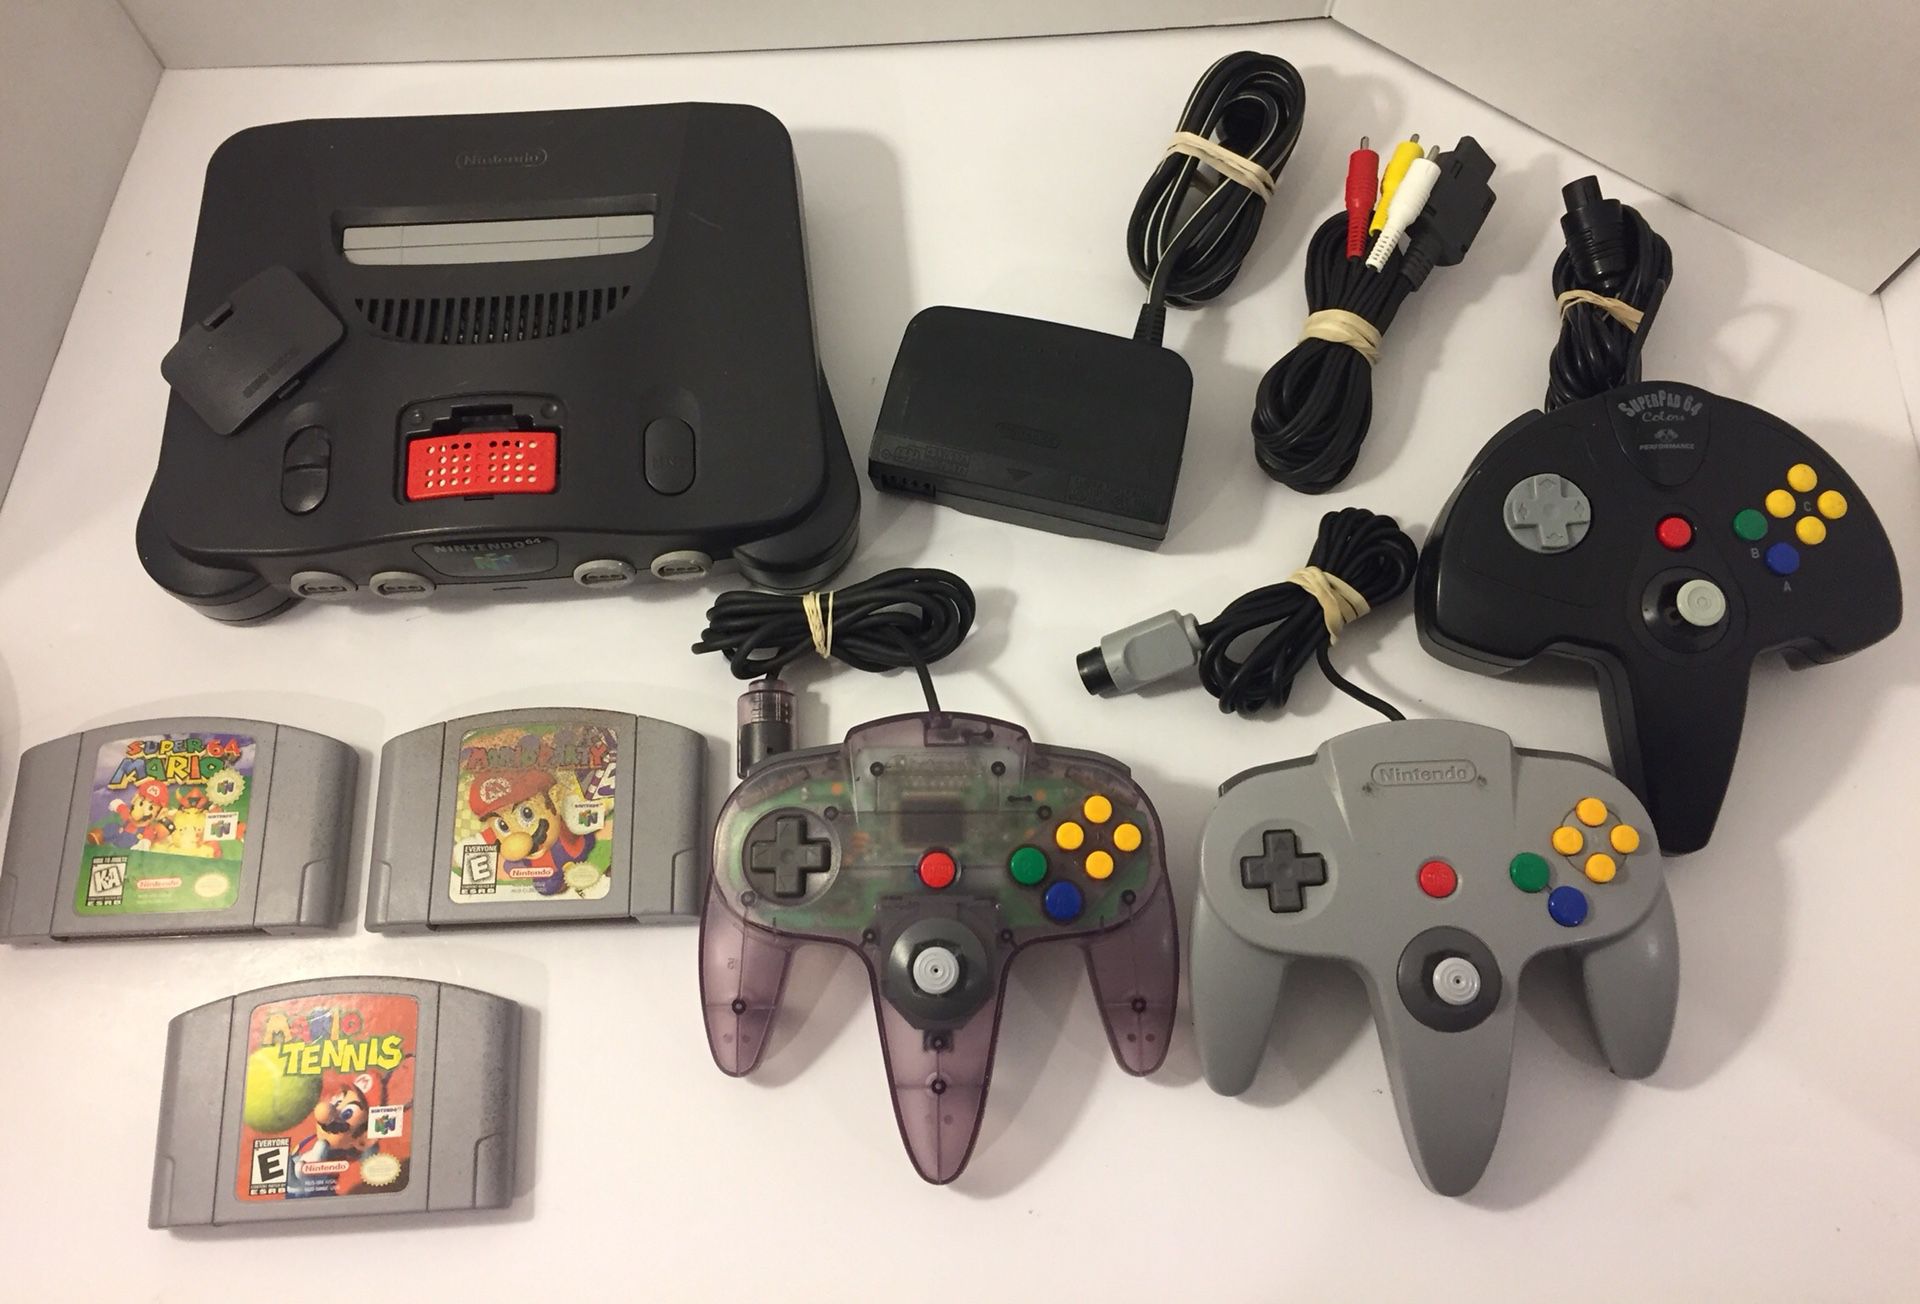 Nintendo 64 N64 System, Controllers and Games